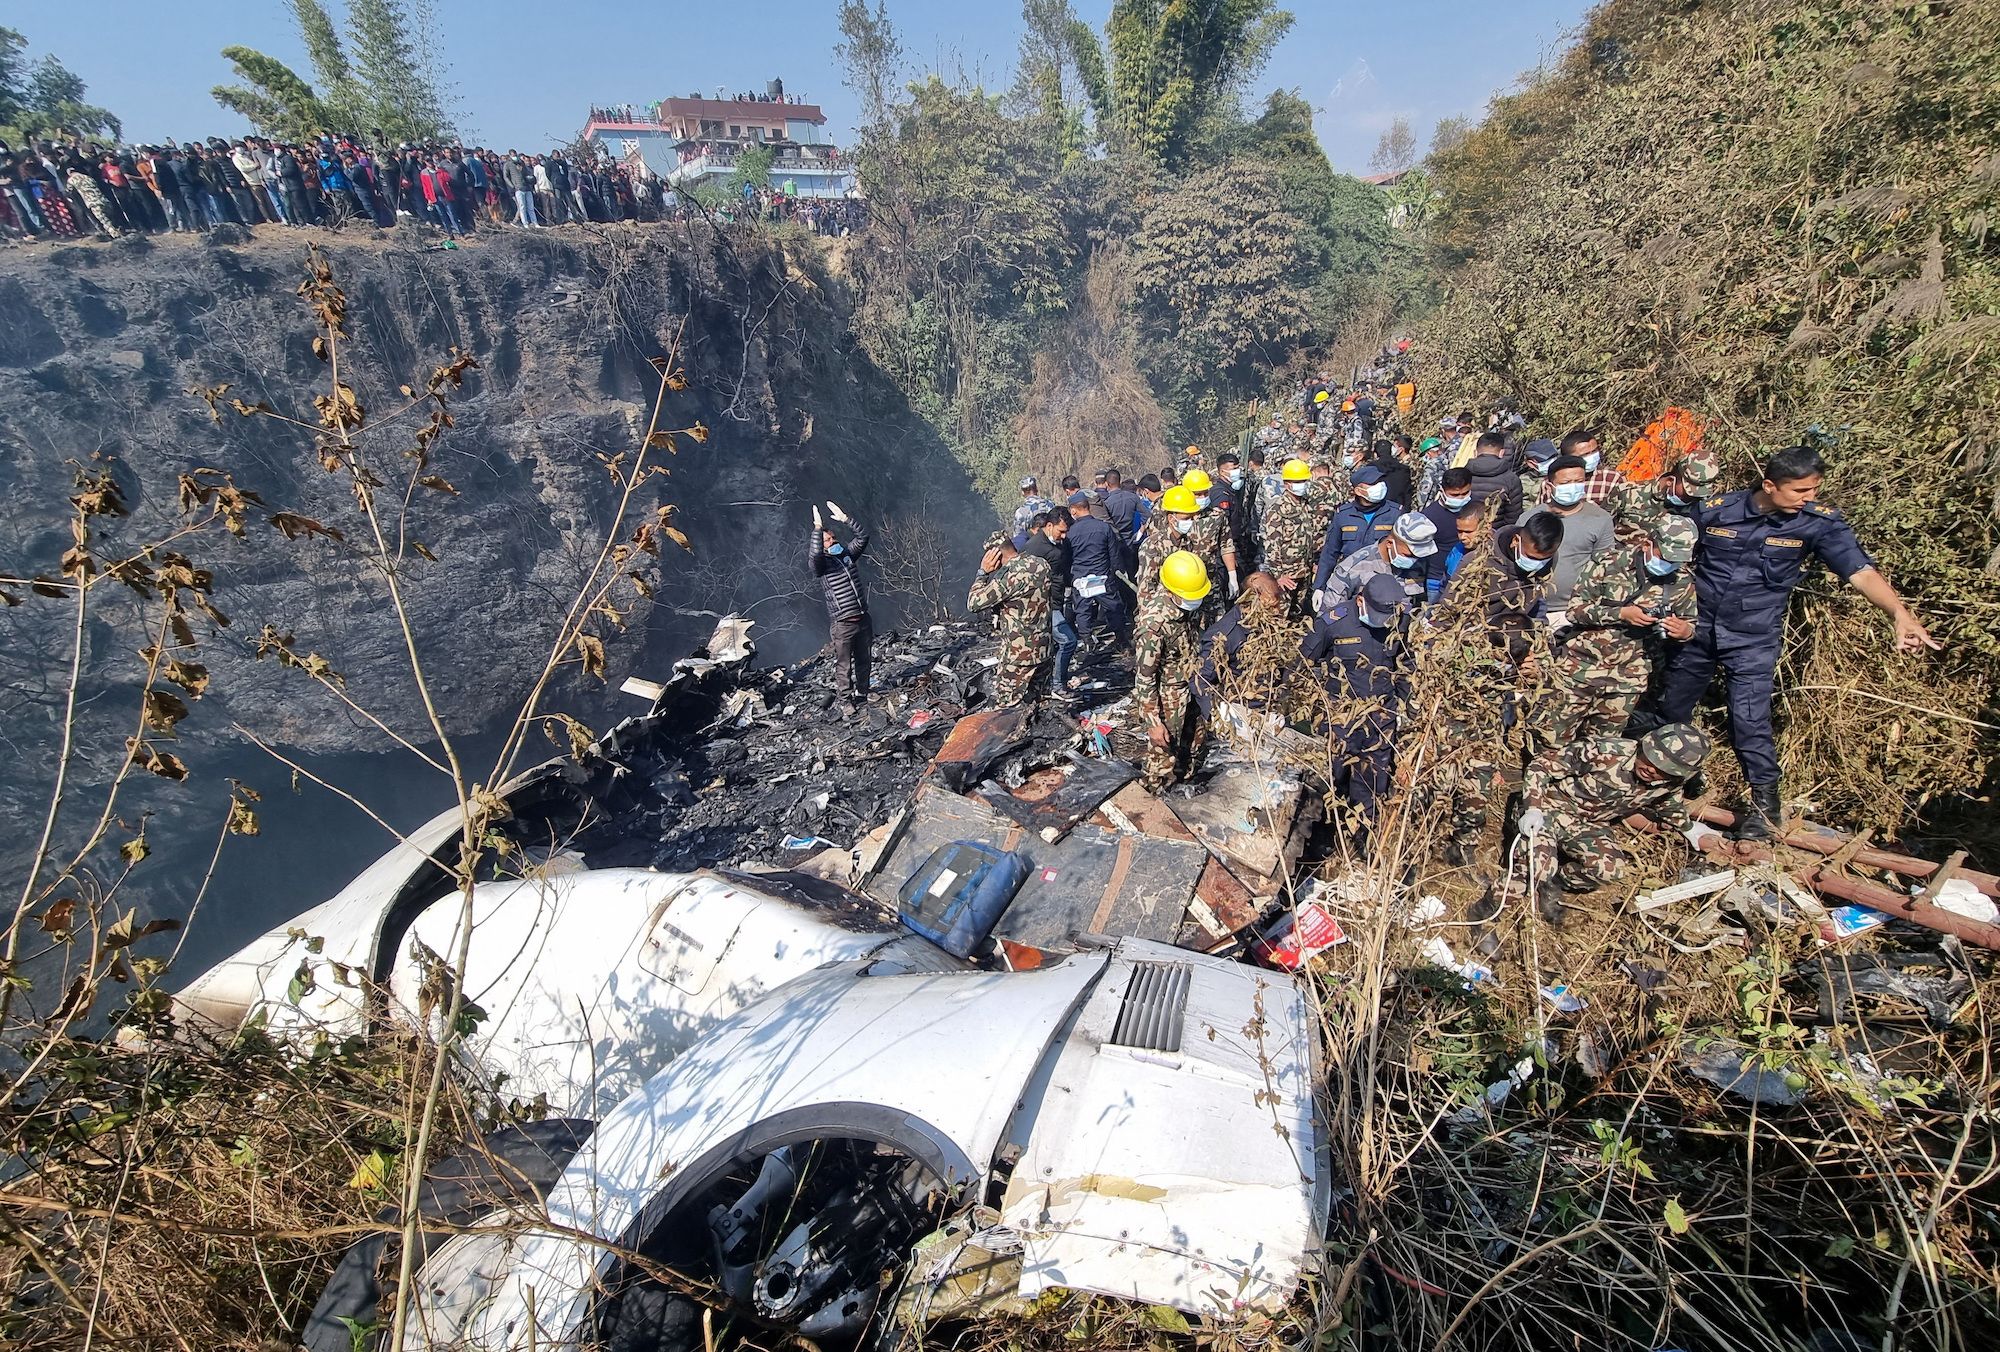 Nepal plane crash: At least 68 killed as Yeti Airlines aircraft comes down near city of Pokhara | CNN